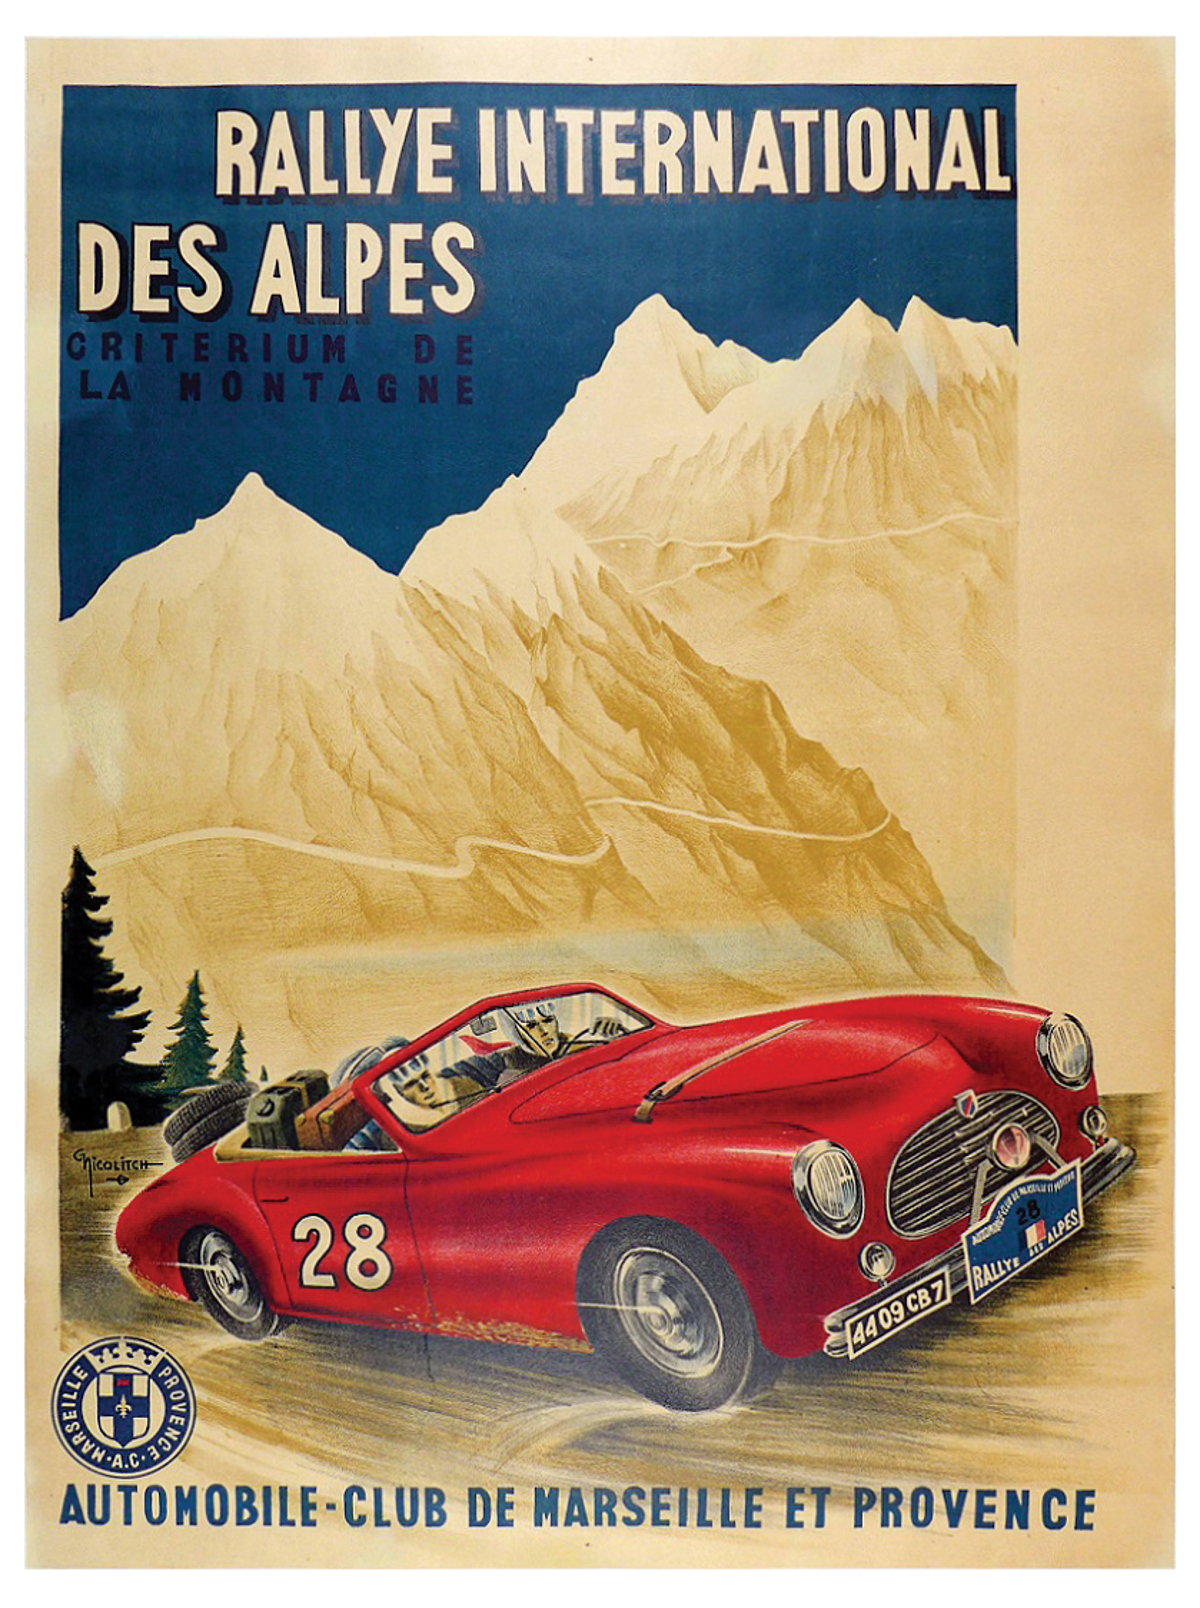 Rallye International des Alpes ca. 1950s offered in RM Sotheby’s Original Racing Posters online auction